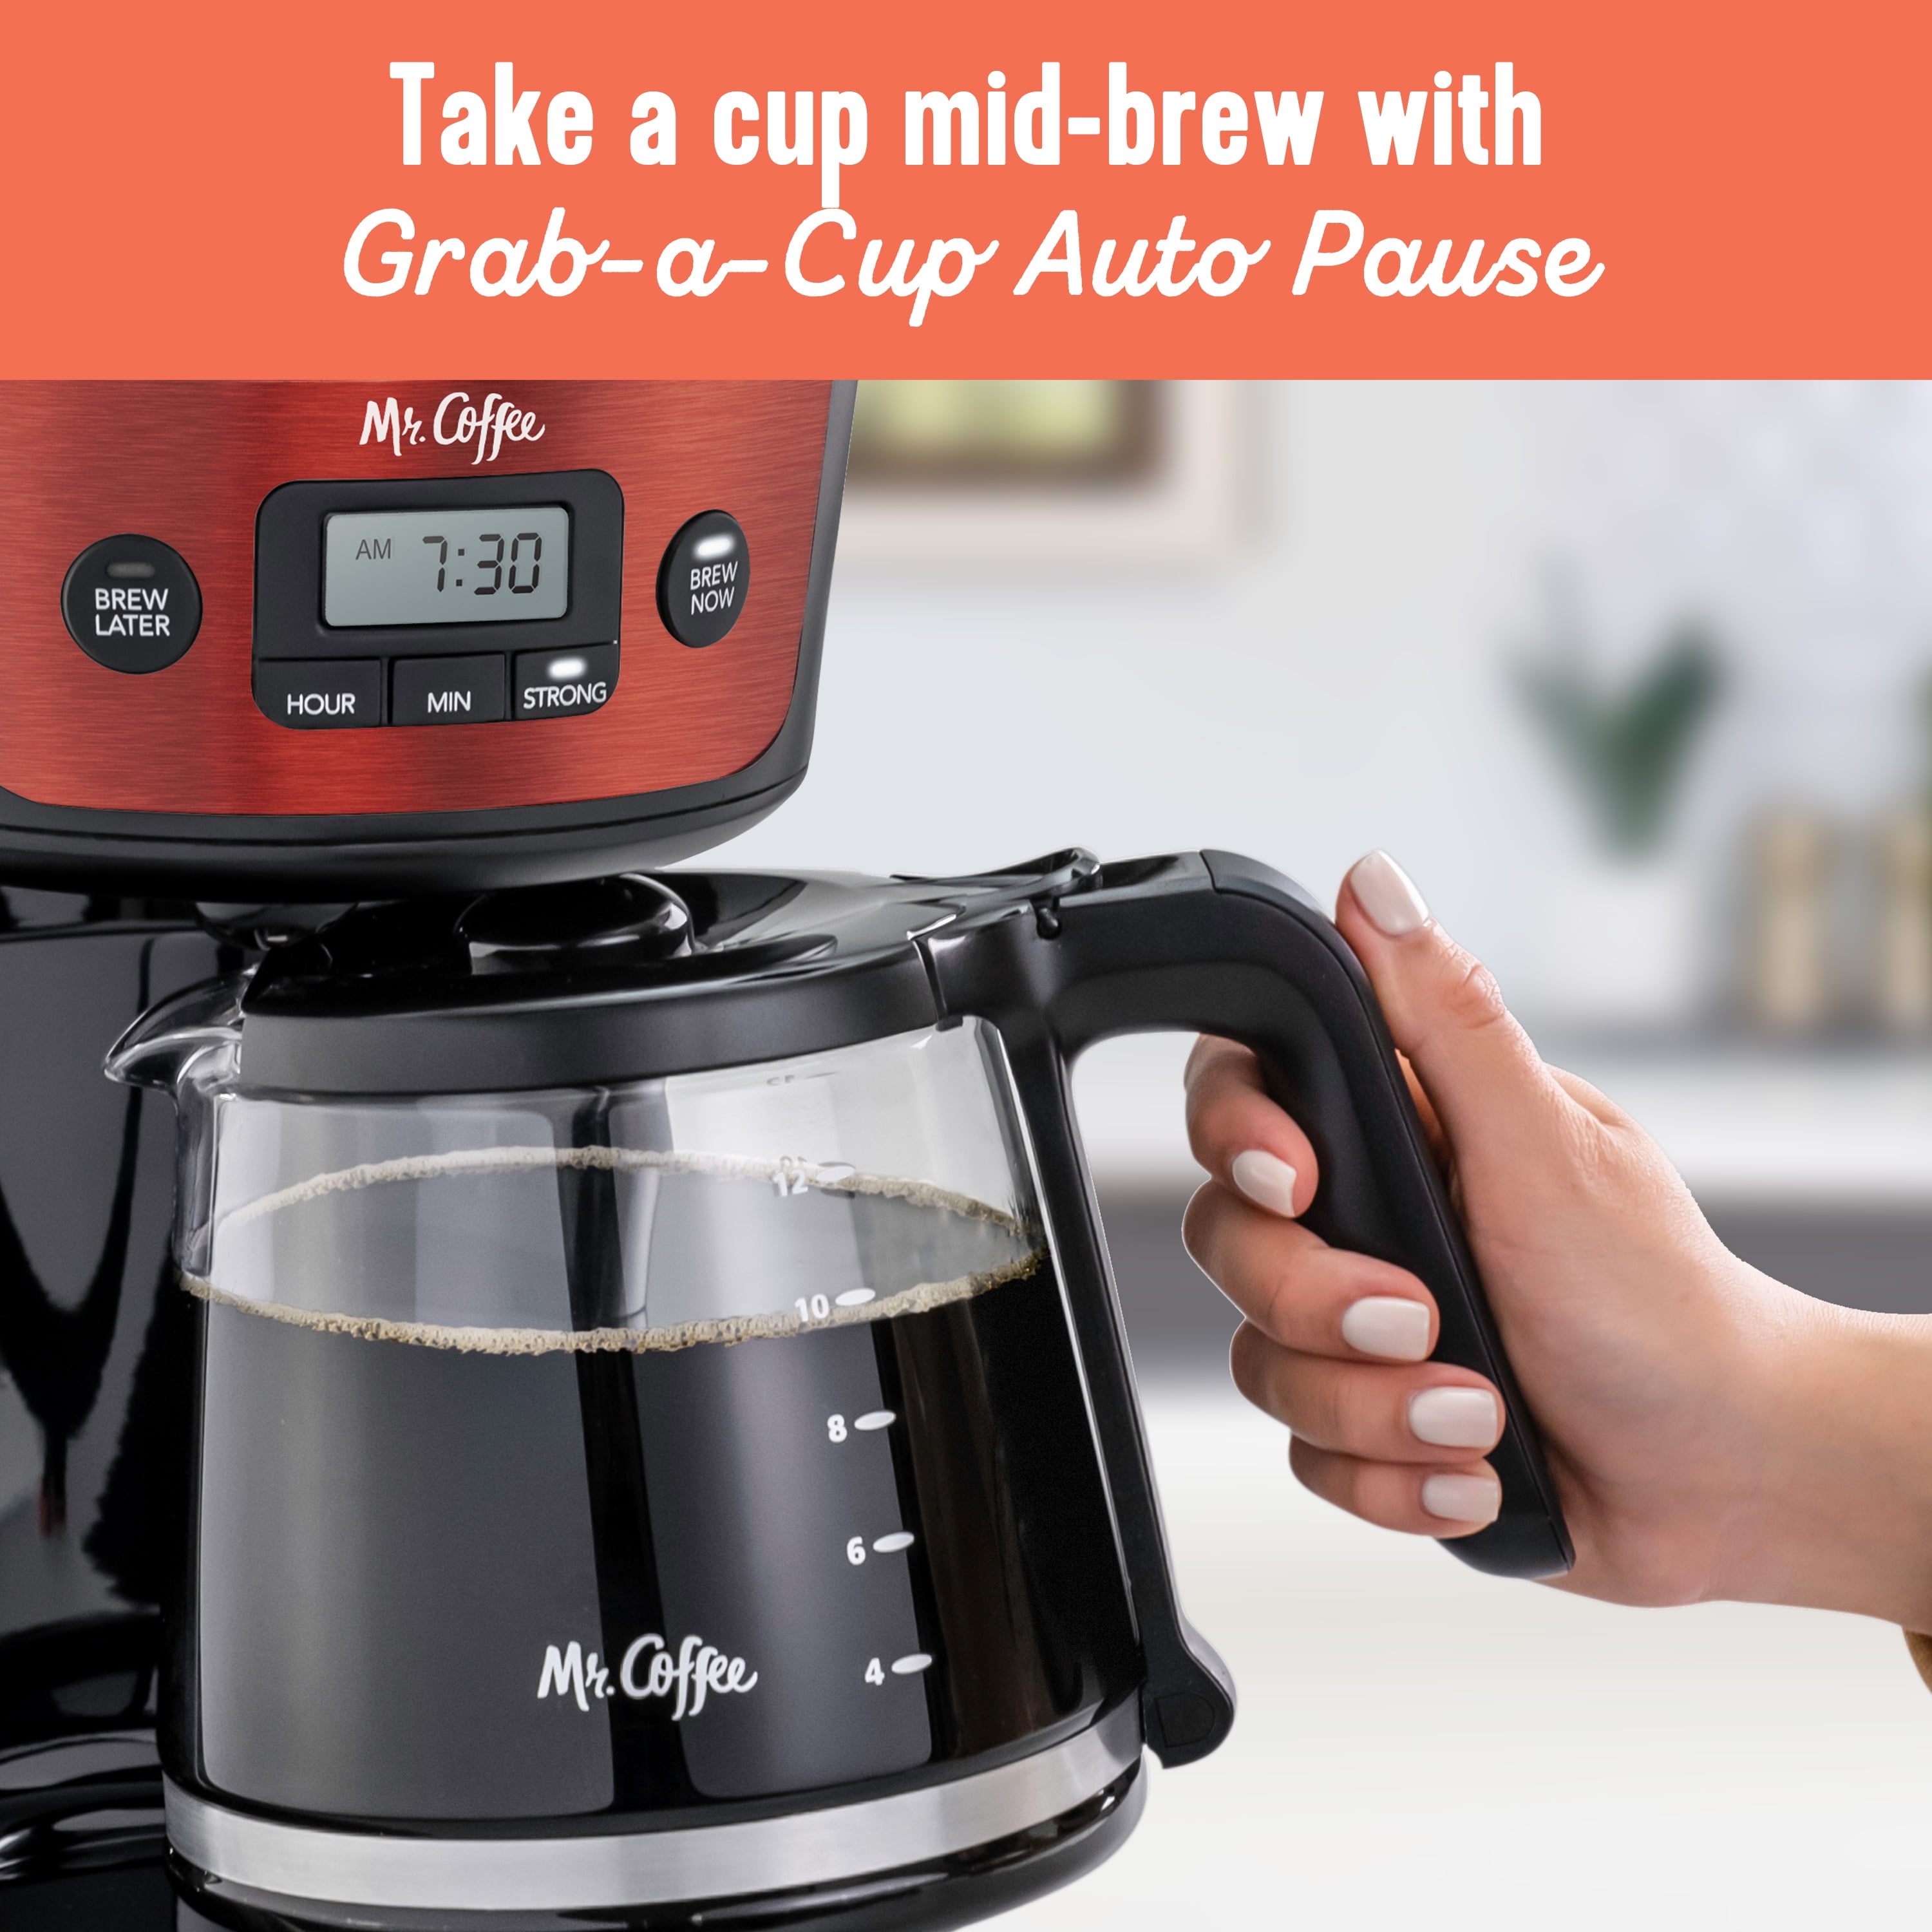 Mr. Coffee 12-Cup Programmable Coffee Maker with Rapid Brew System -  Stainless Steel